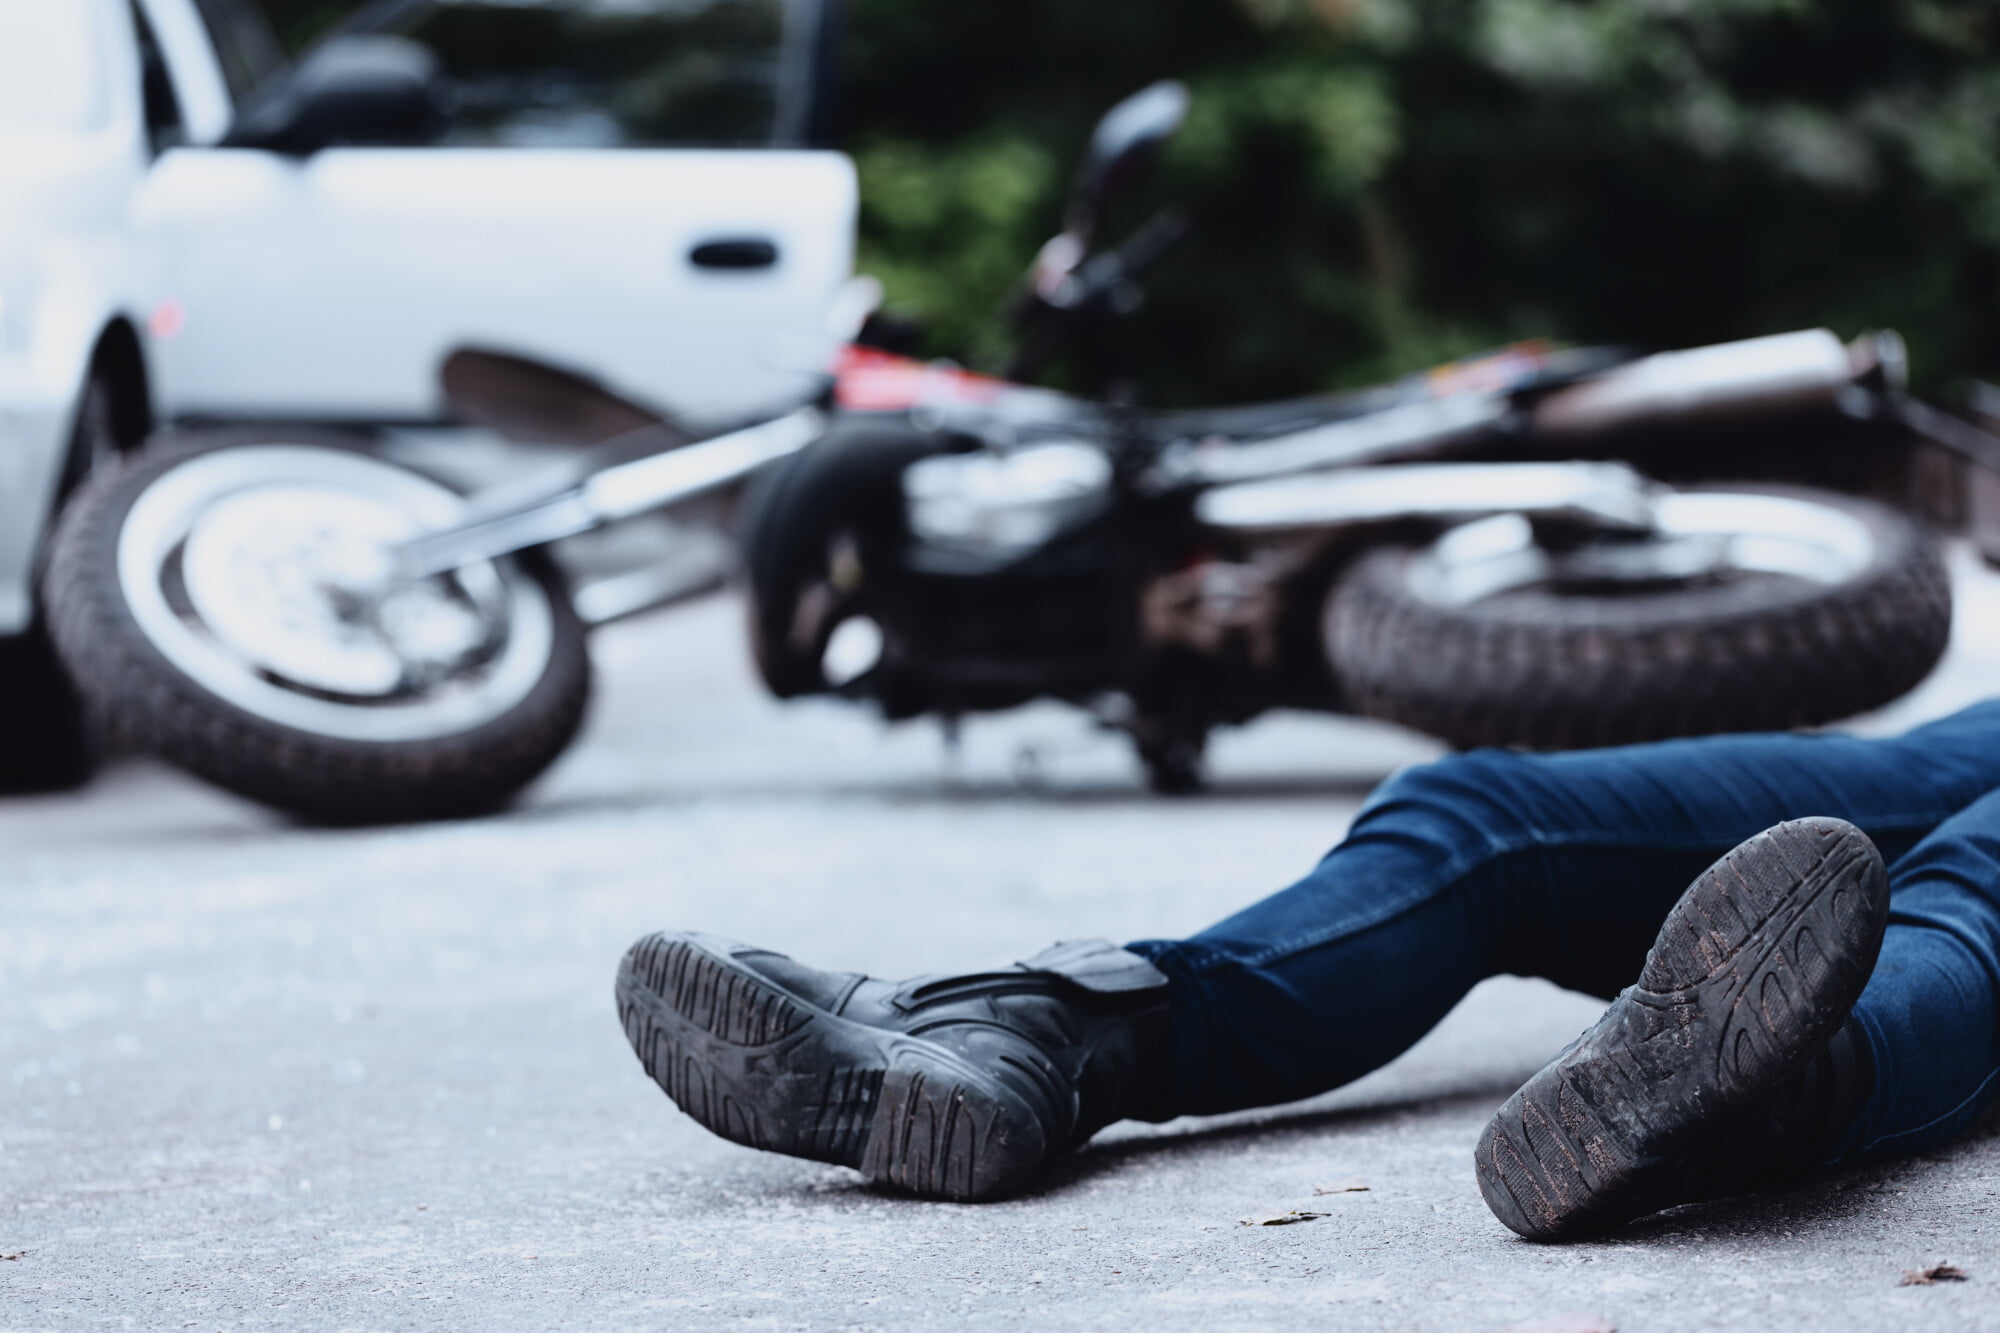 One can sustain different types of injuries after a car accident, for example, a crush injury. Learn more about crush injuries in this guide.